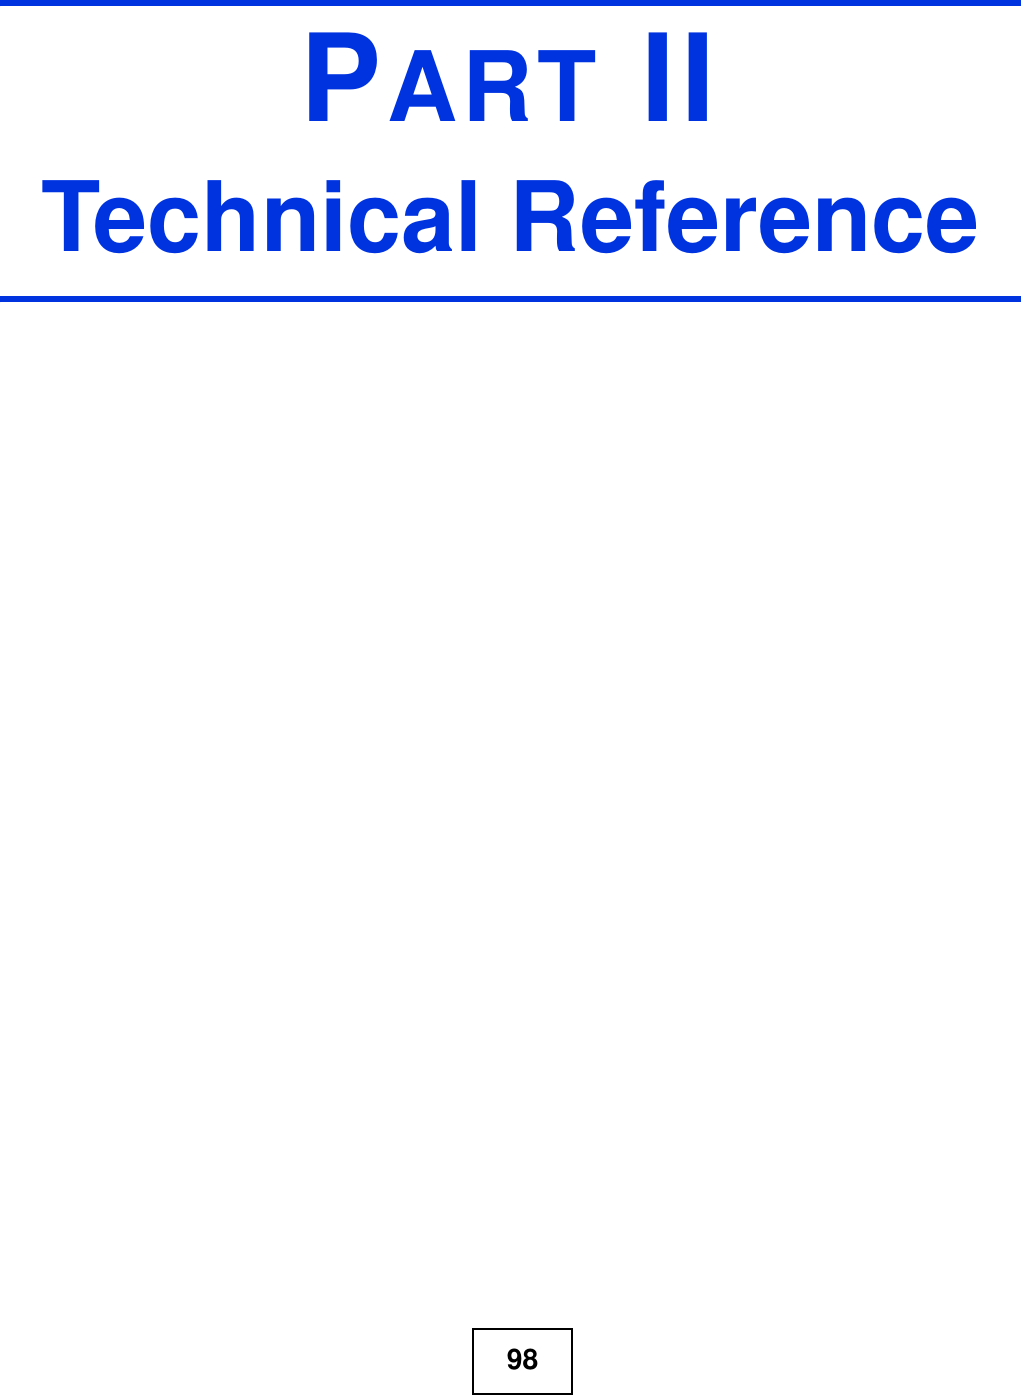 98PART IITechnical Reference